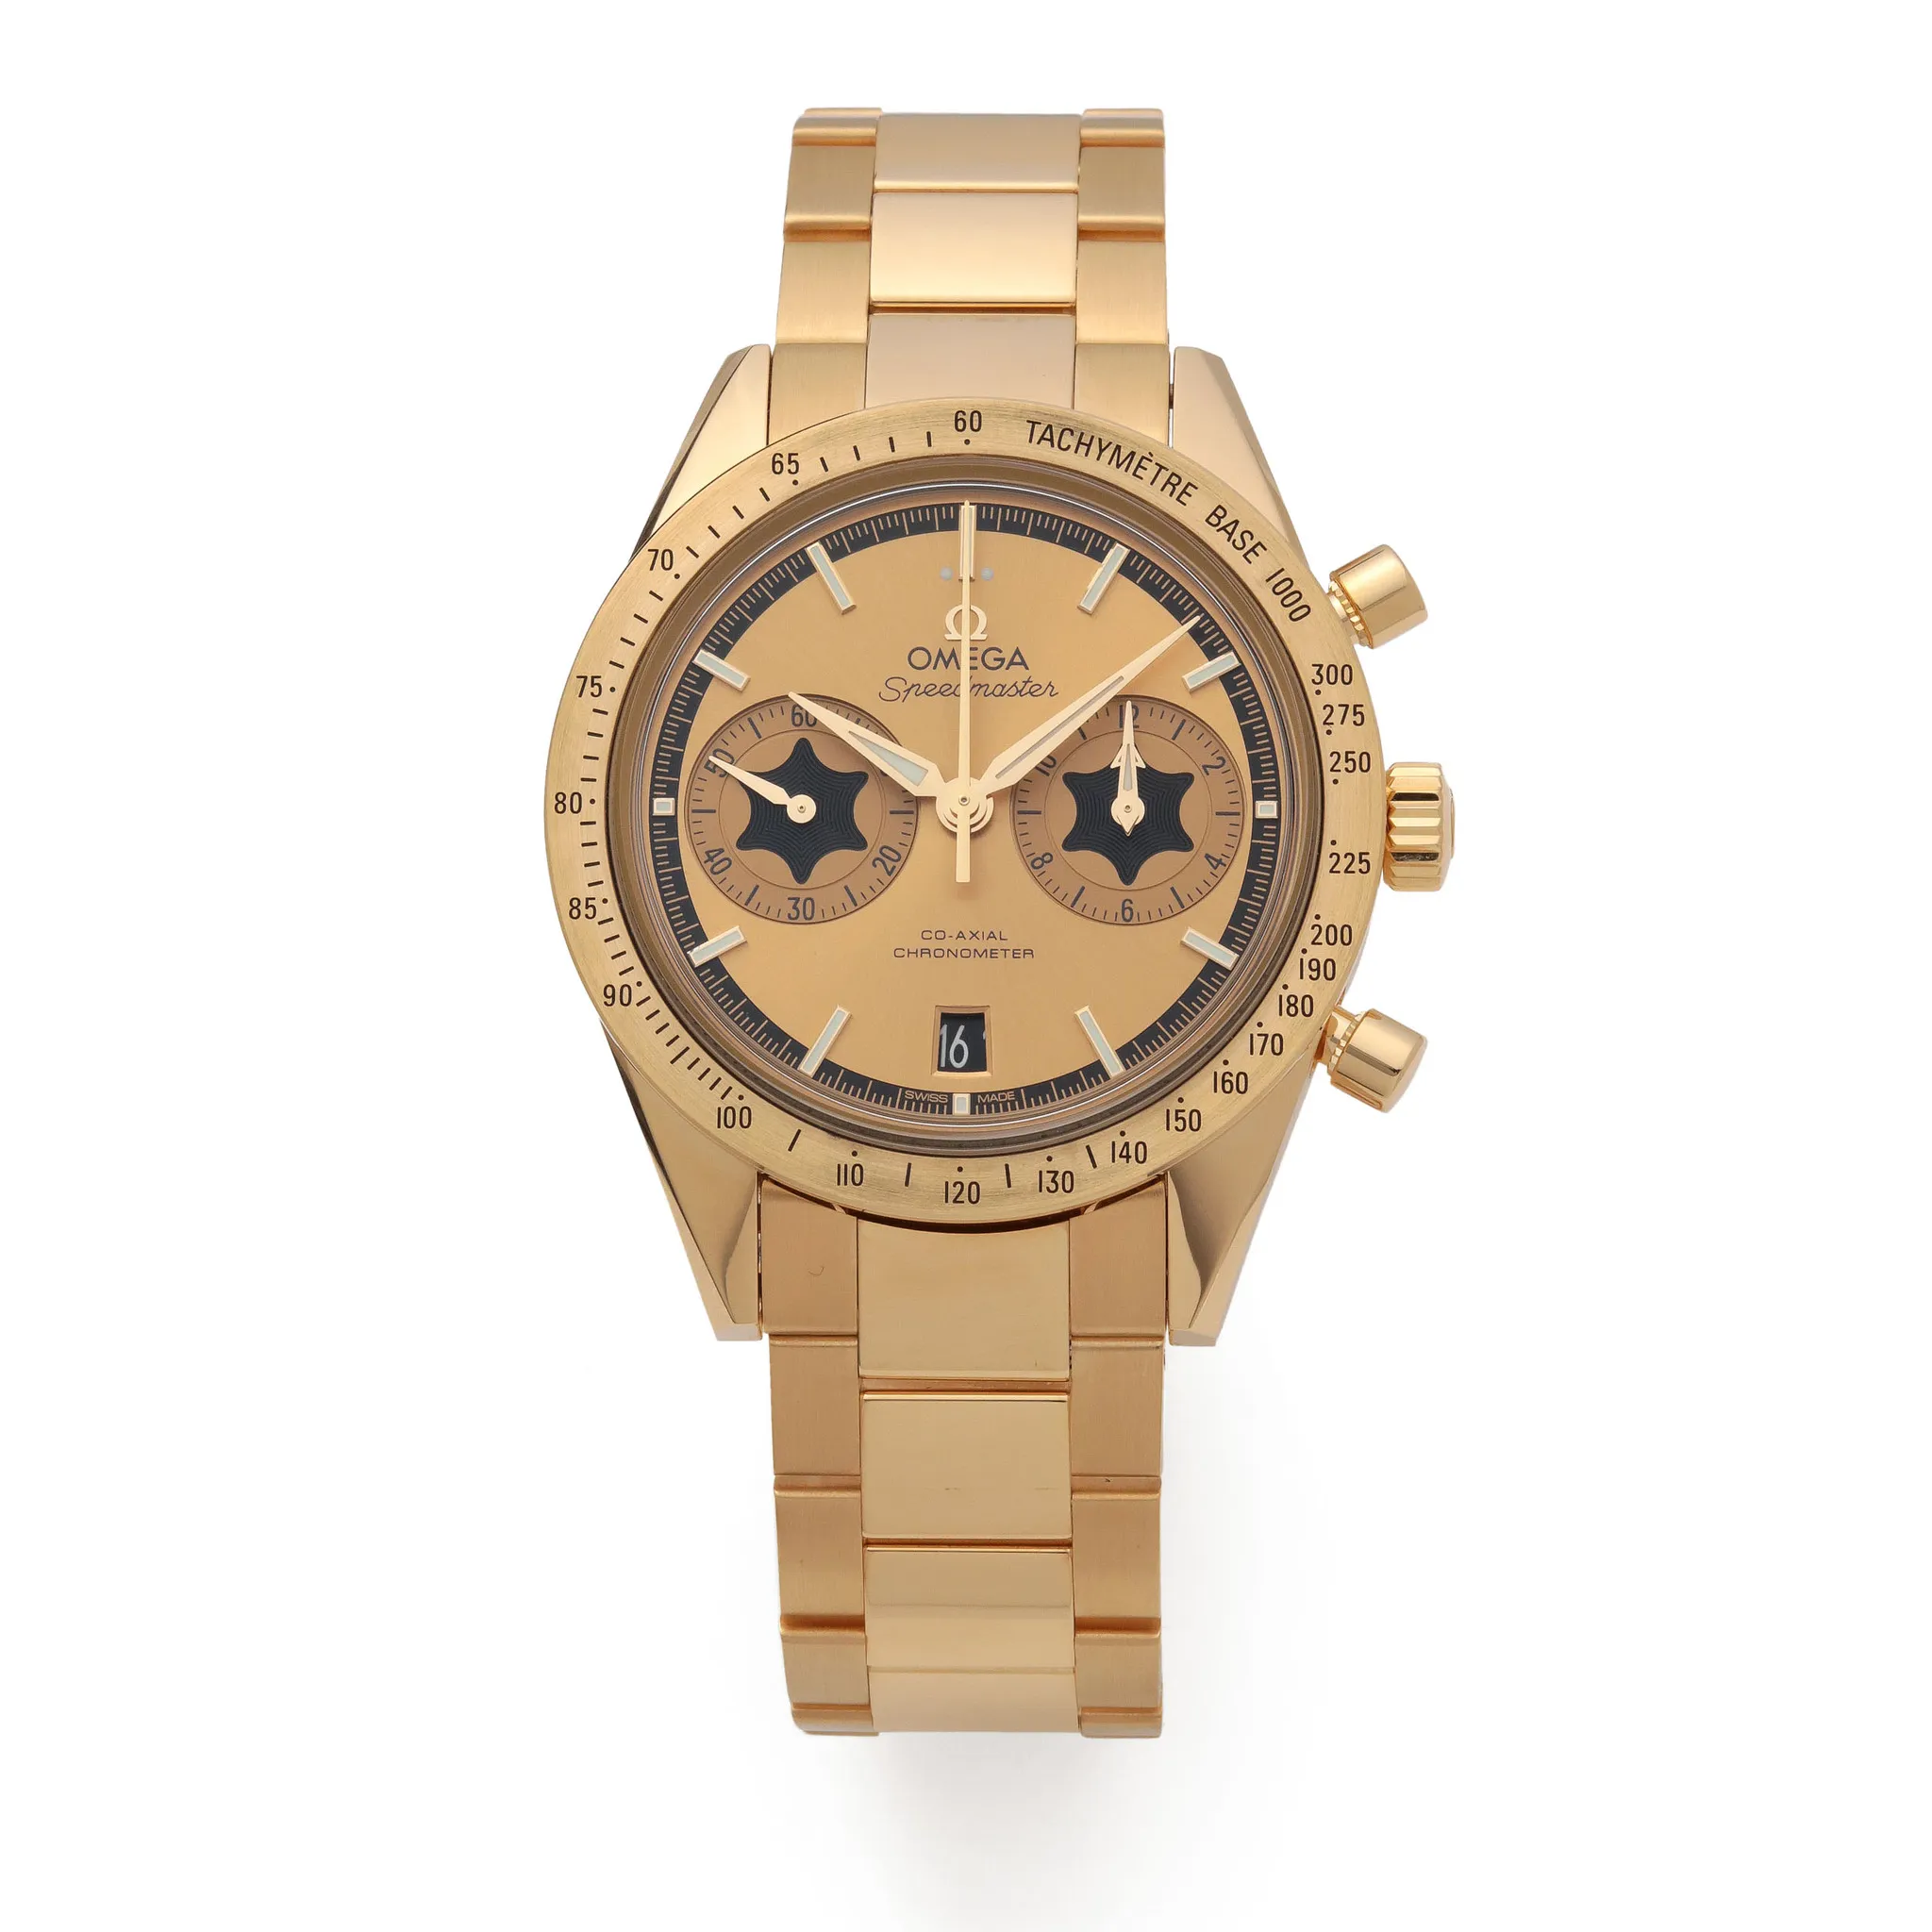 Omega Speedmaster Co-Axial Chronometer 331.50.42.51.08.001 41.5mm 18k yellow gold Gold and black